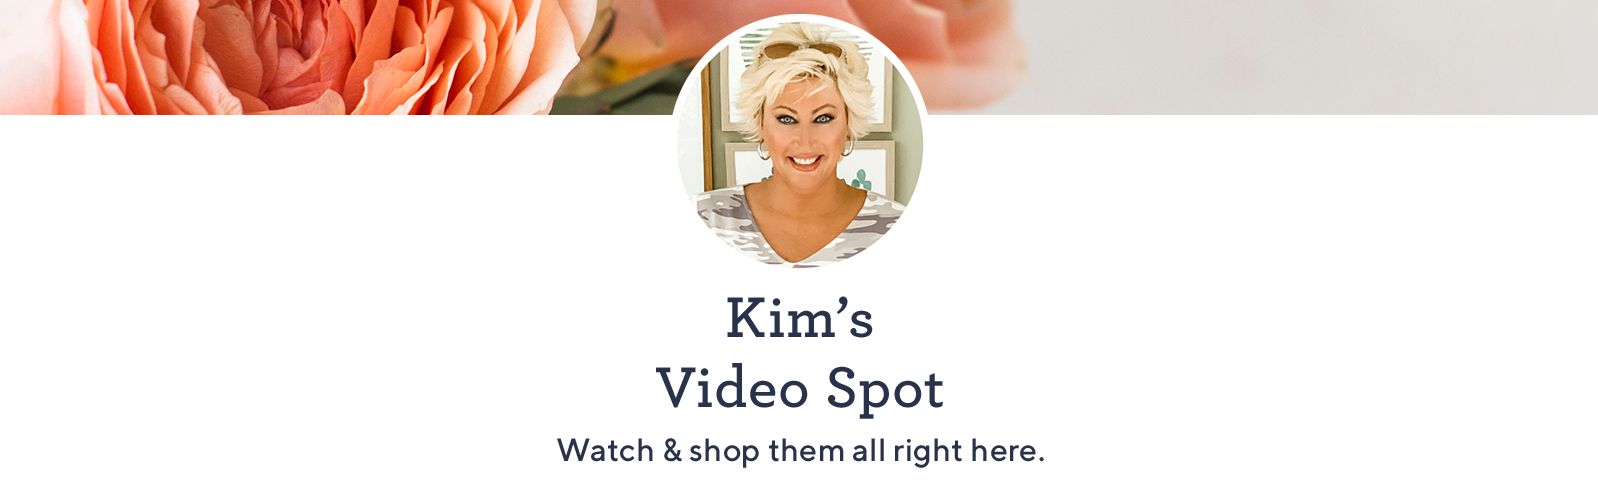 Kim's Video Spot. Watch & shop them all right here.